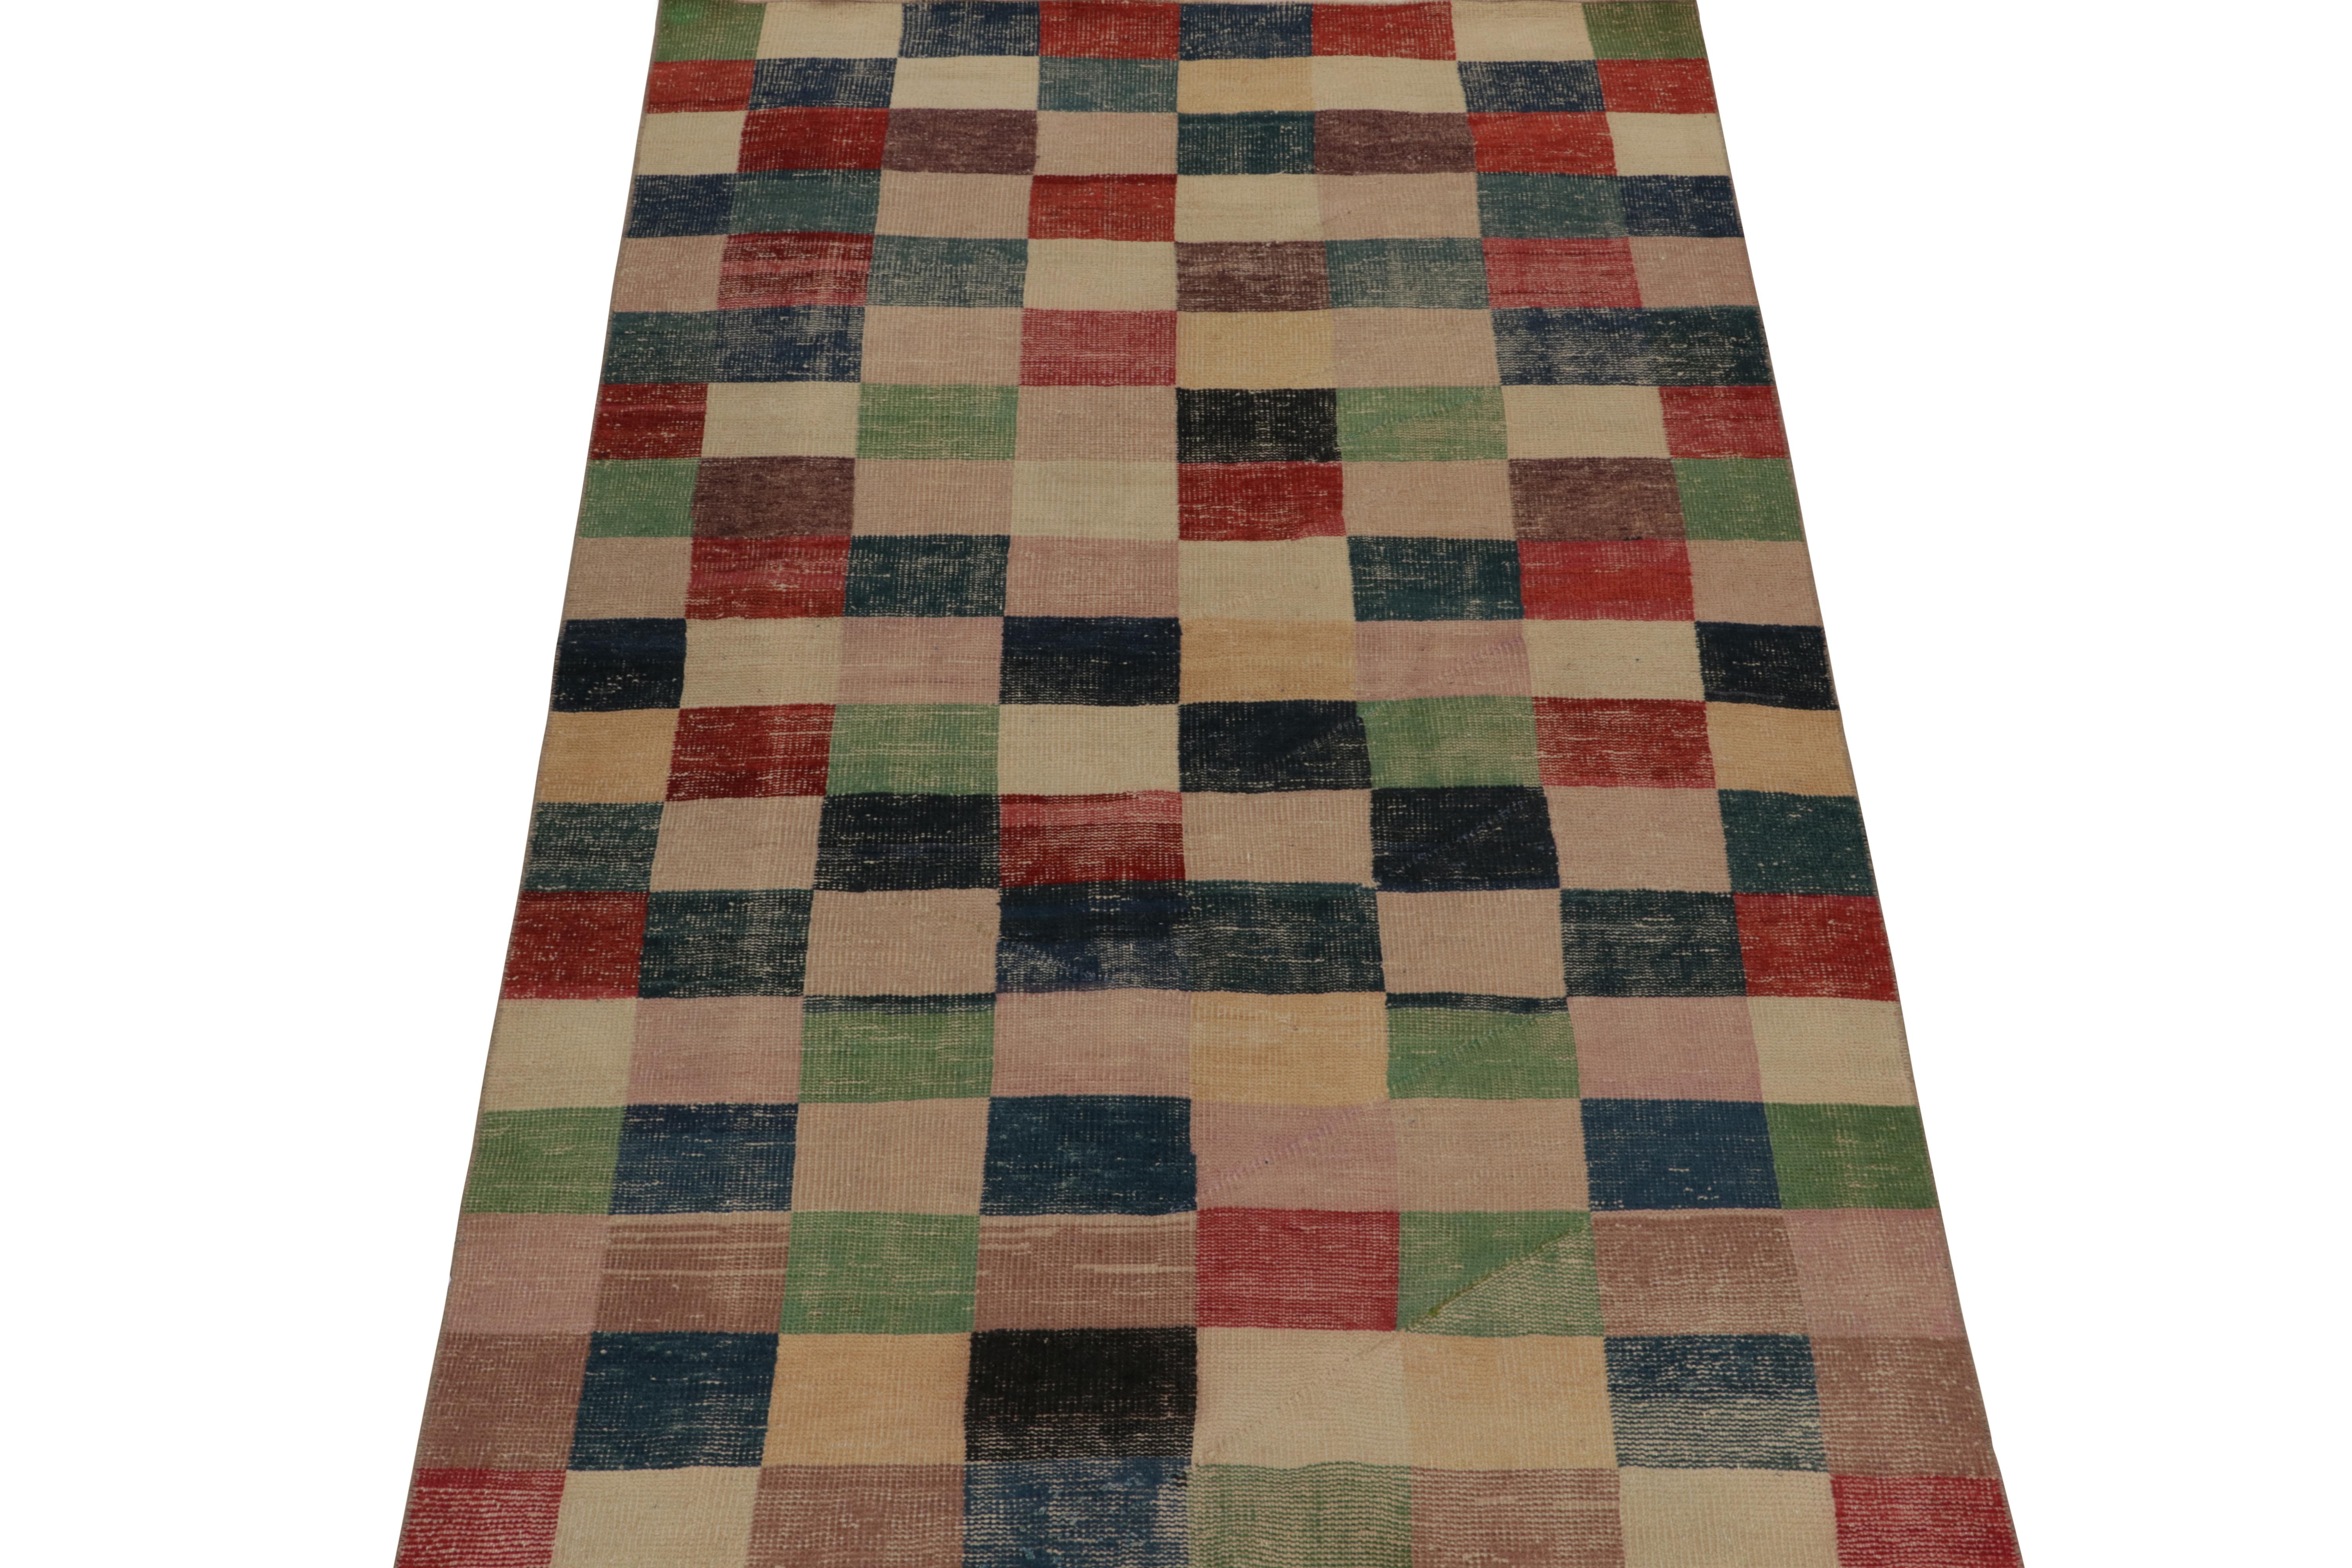 This vintage 5x8 rug is a new addition to Rug & Kilim’s commemorative Mid-Century Pasha Collection. This line is a commemoration of rare curations we believe to hail from mid-century Turkish designer Zeki Müren.

Further on the Design:

This